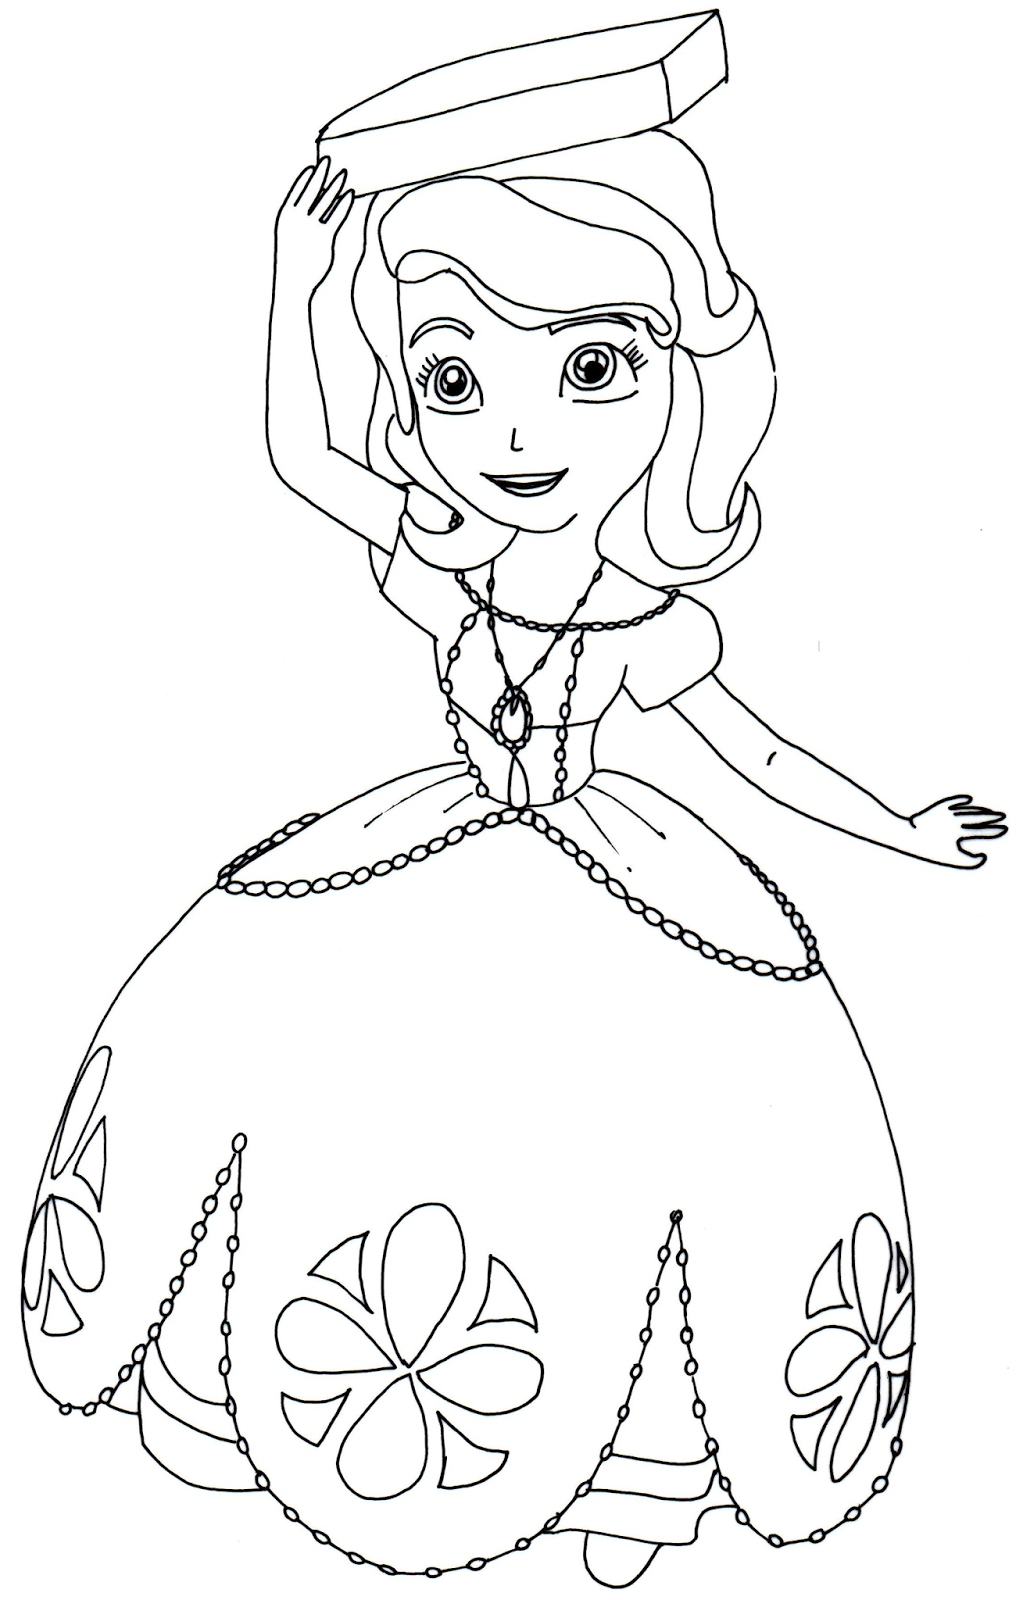 Sofia The First Coloring Pages: Perfect Posture - Sofia the First ...